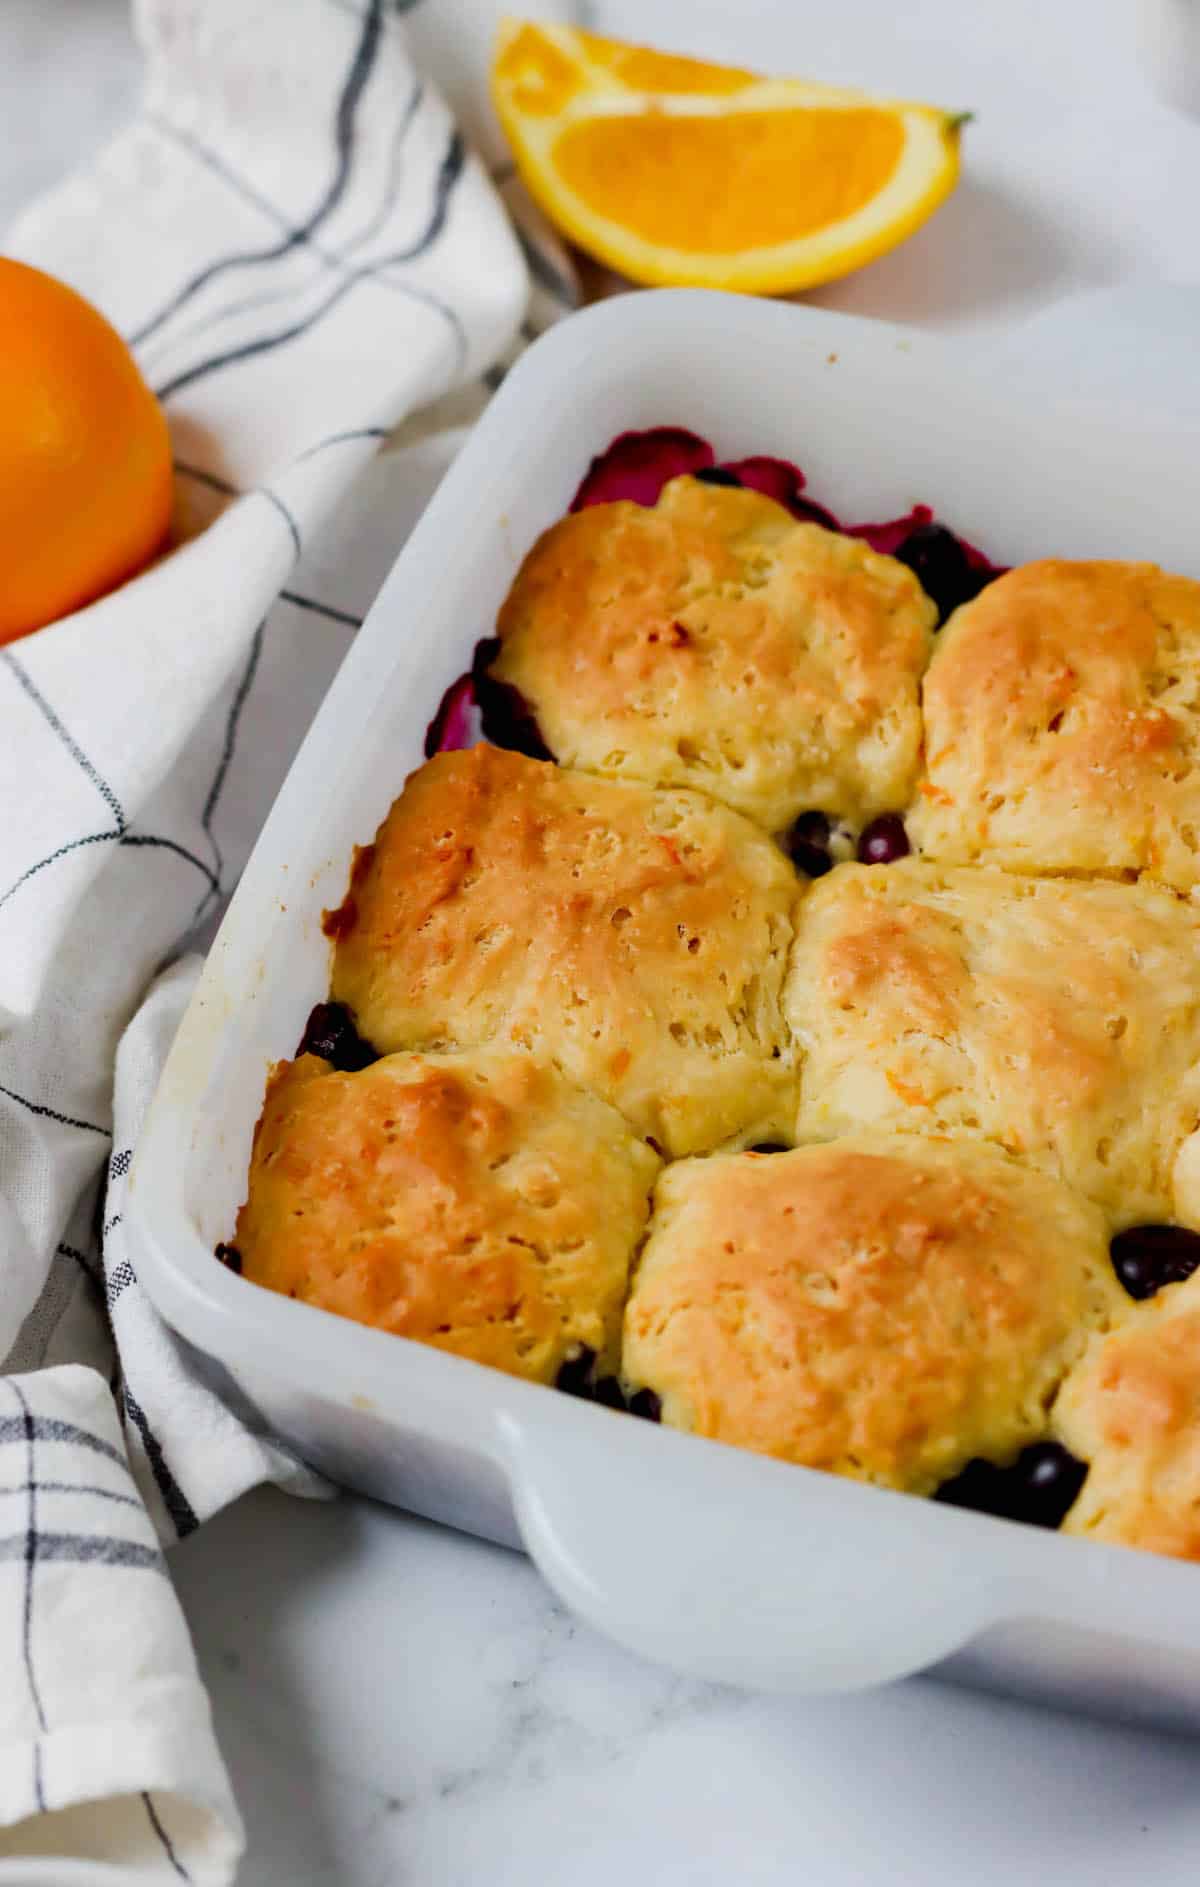 A baking dish of freshly baked blueberry cobbler with orange biscuit puffs